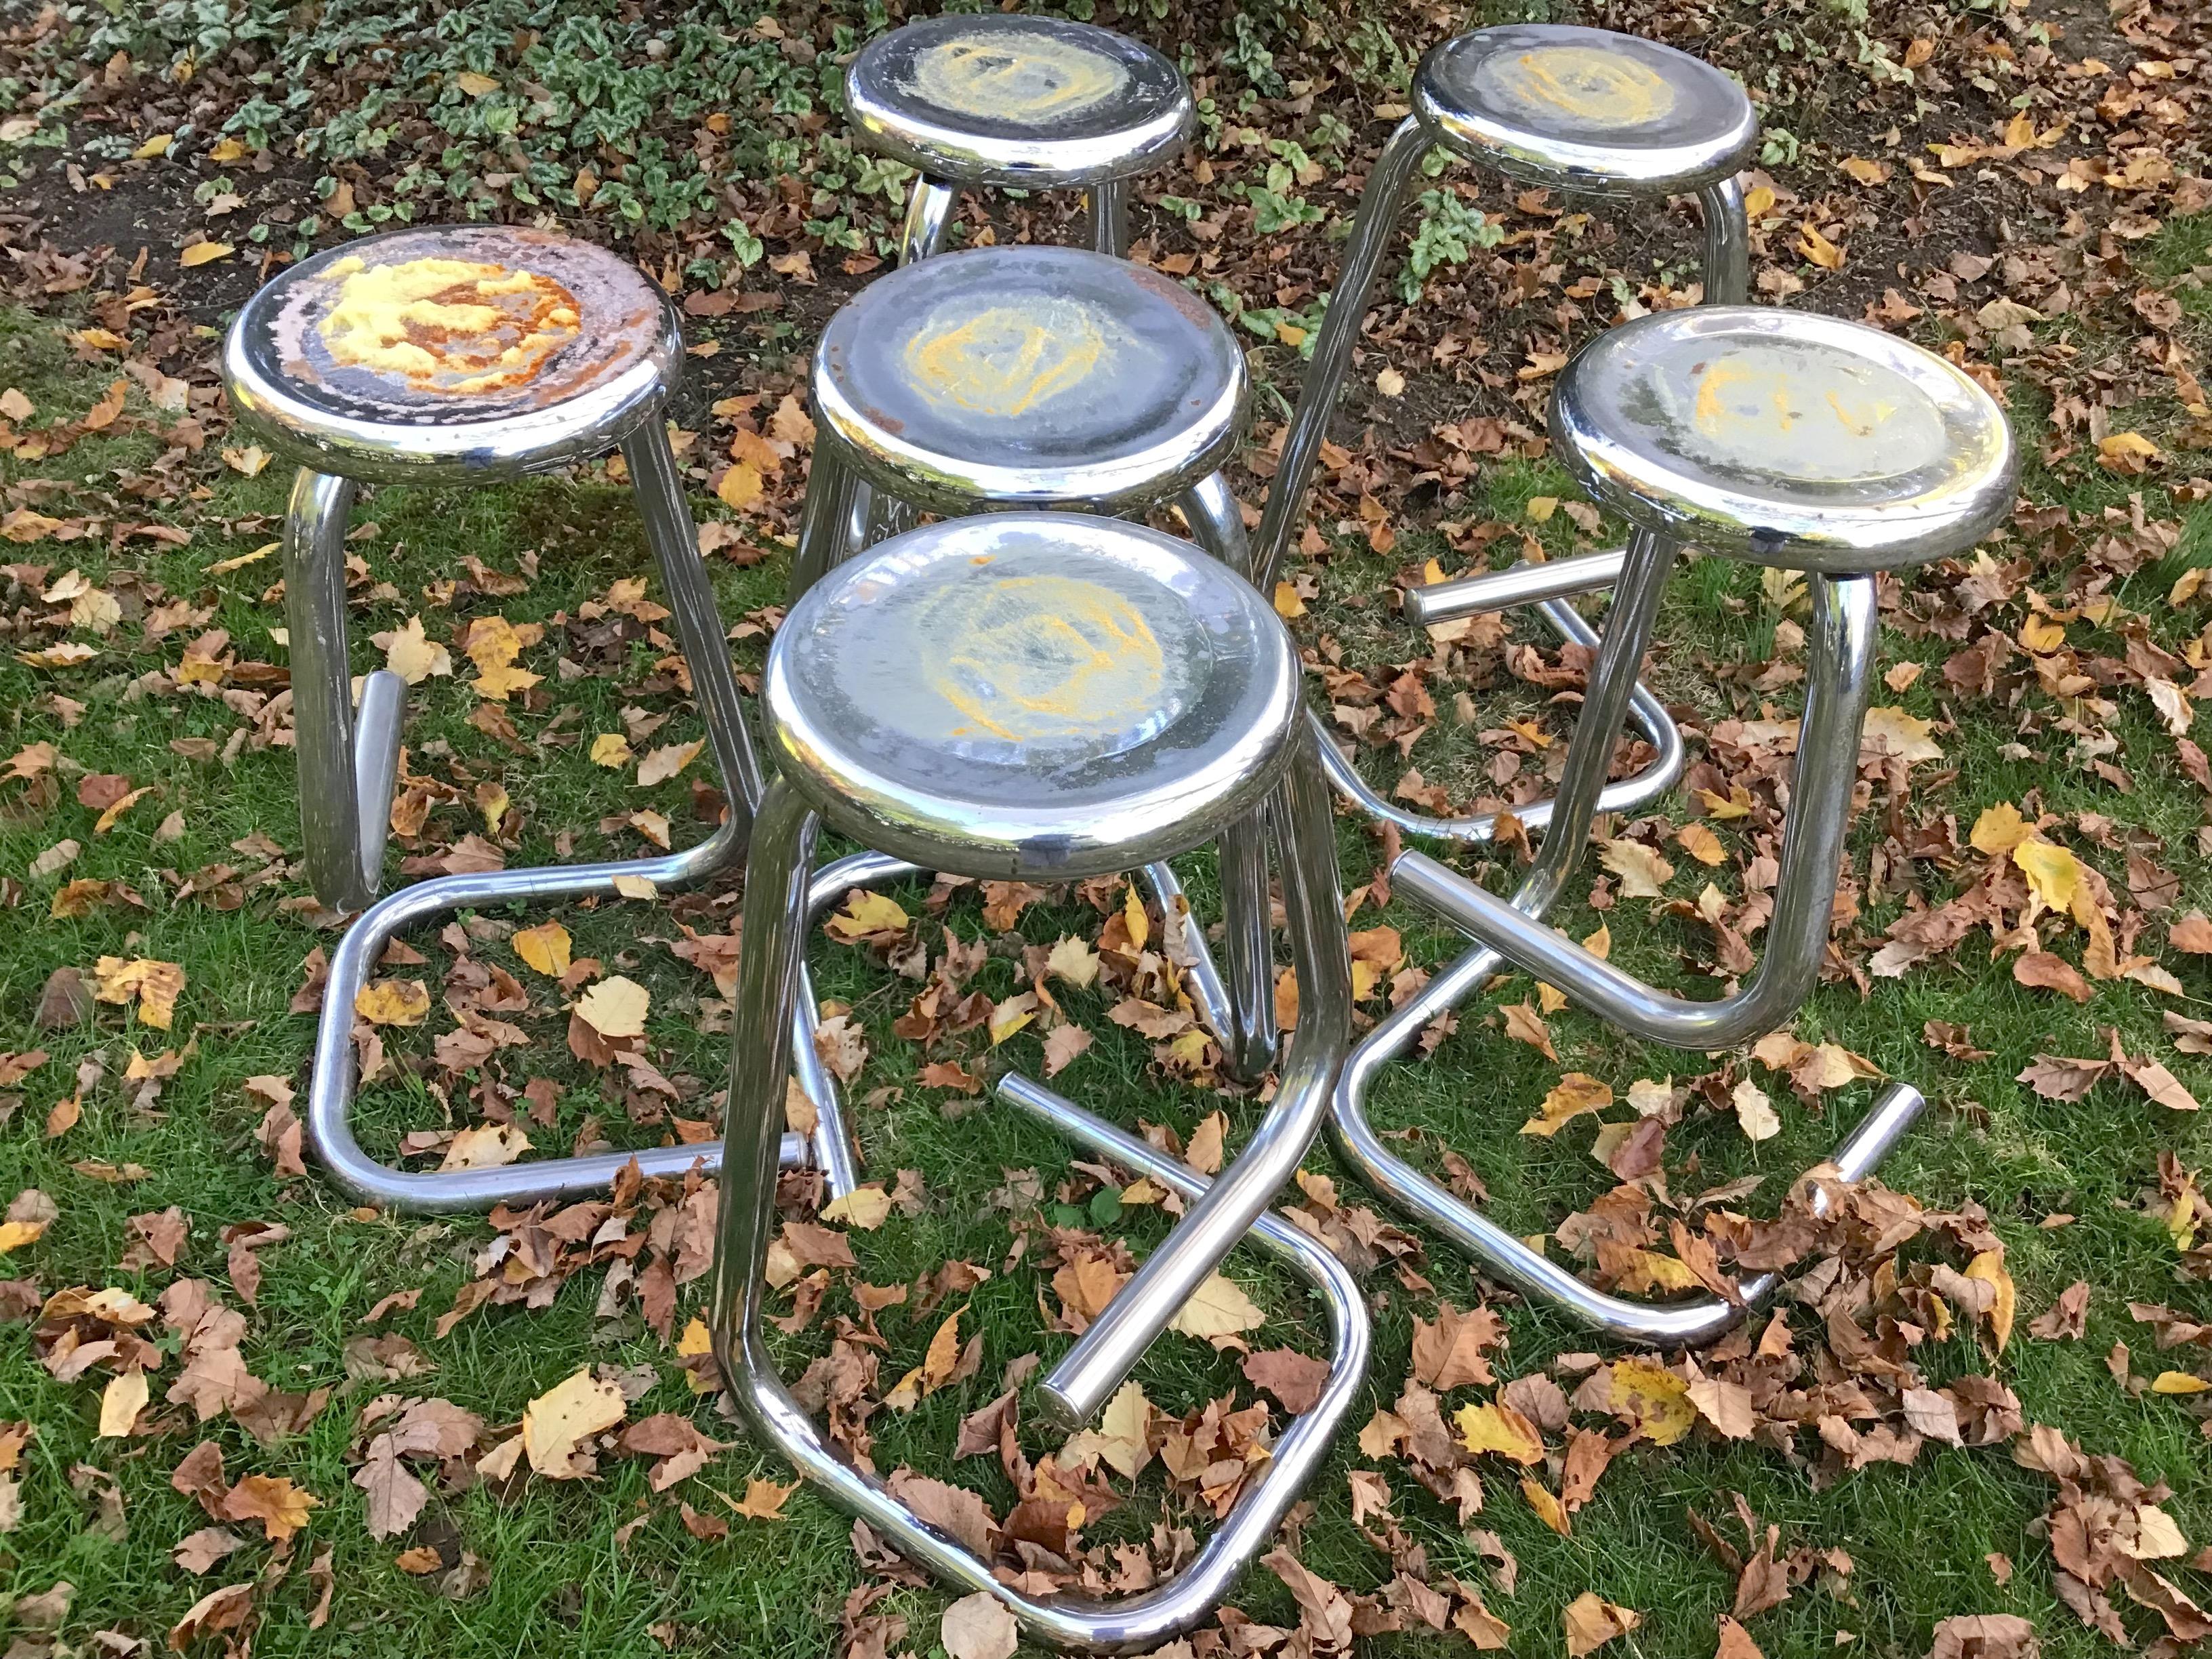 Chrome vintage bar stools, paperclip stools, Kinetics stools 1970s, set of six,
Long Island delivery complimentary.
Designed by Hugh Hamilton & Philip Salmon (model) k700 Kinetics Furniture, made in Canada.
Unfortunately someone glued foam